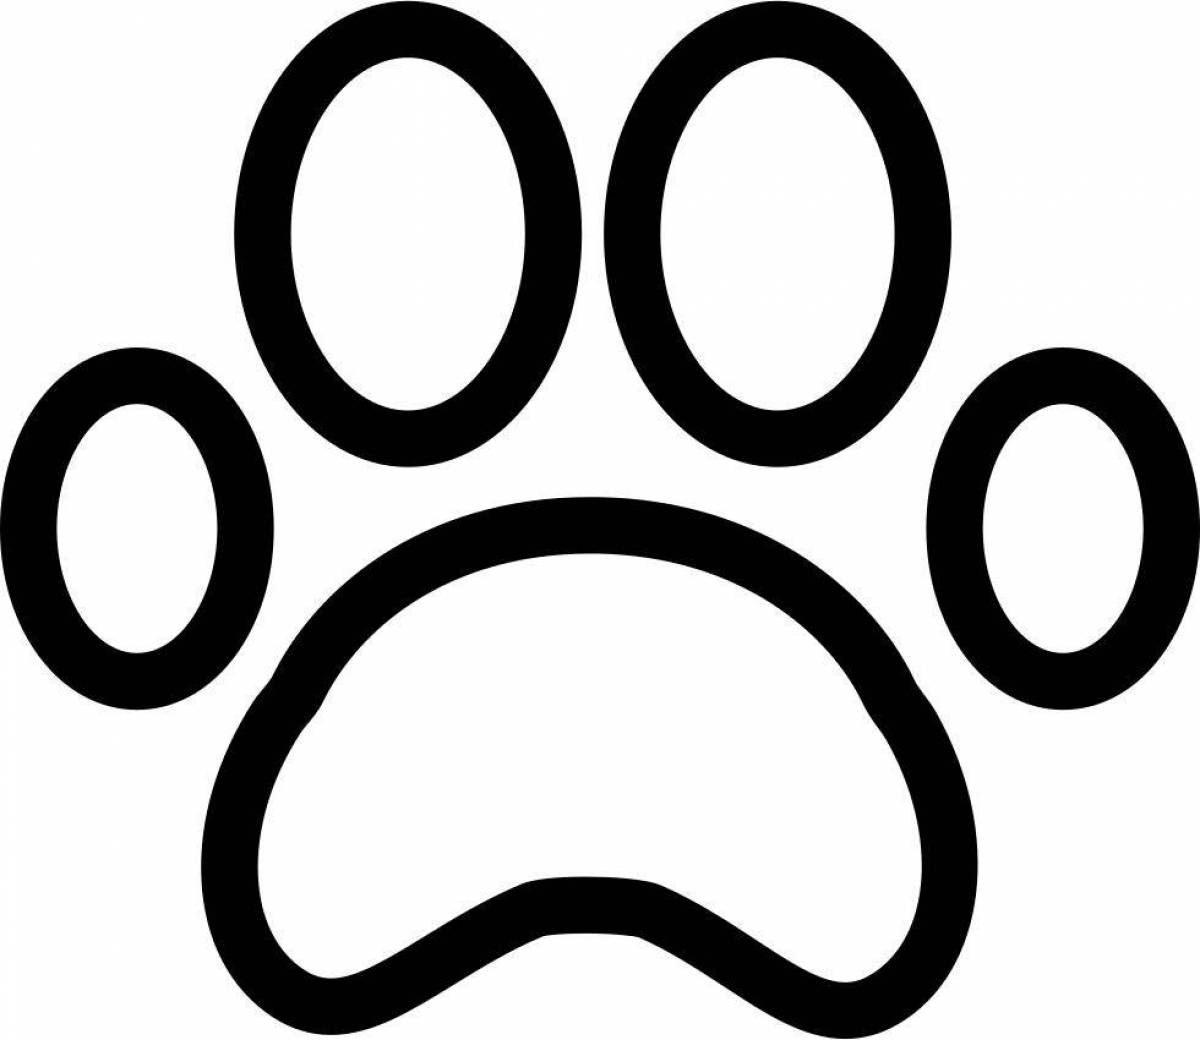 Coloring live cat paw